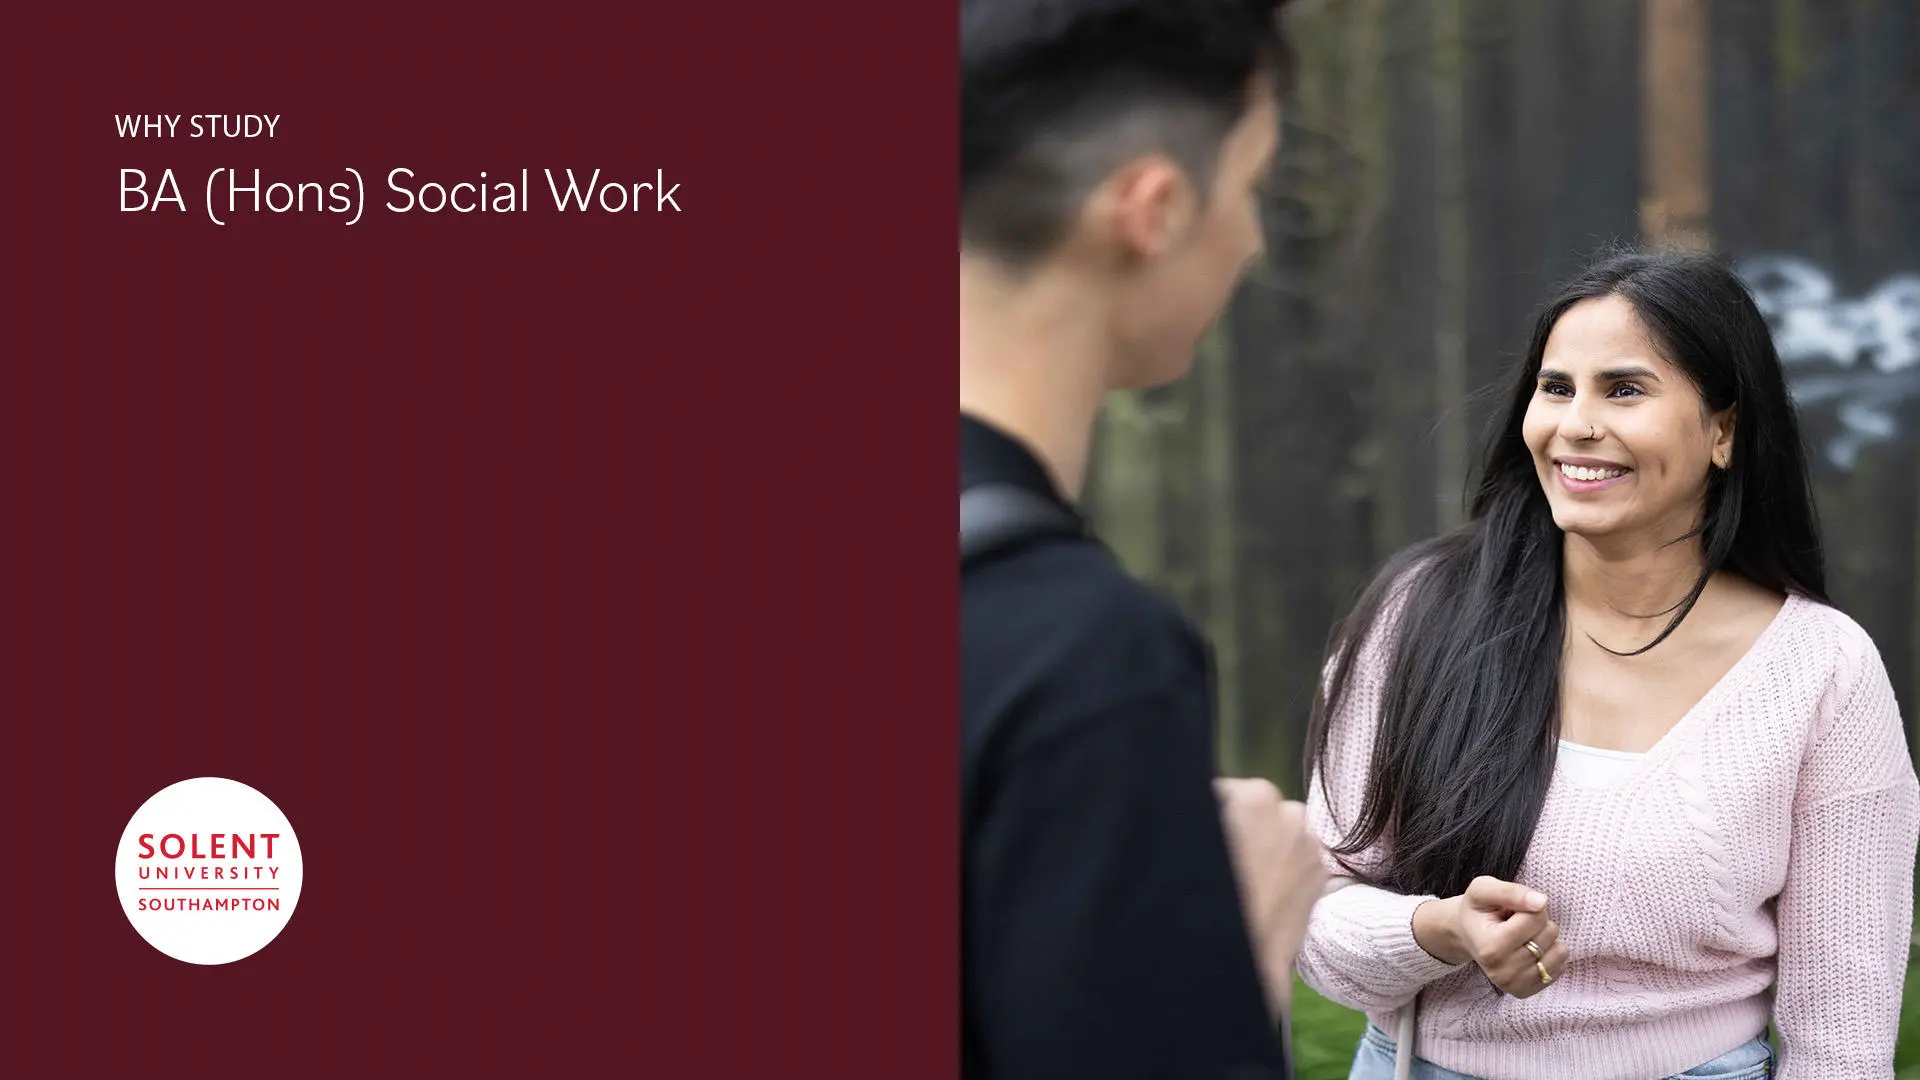 Image reads Why study BA (Hons) Social Work